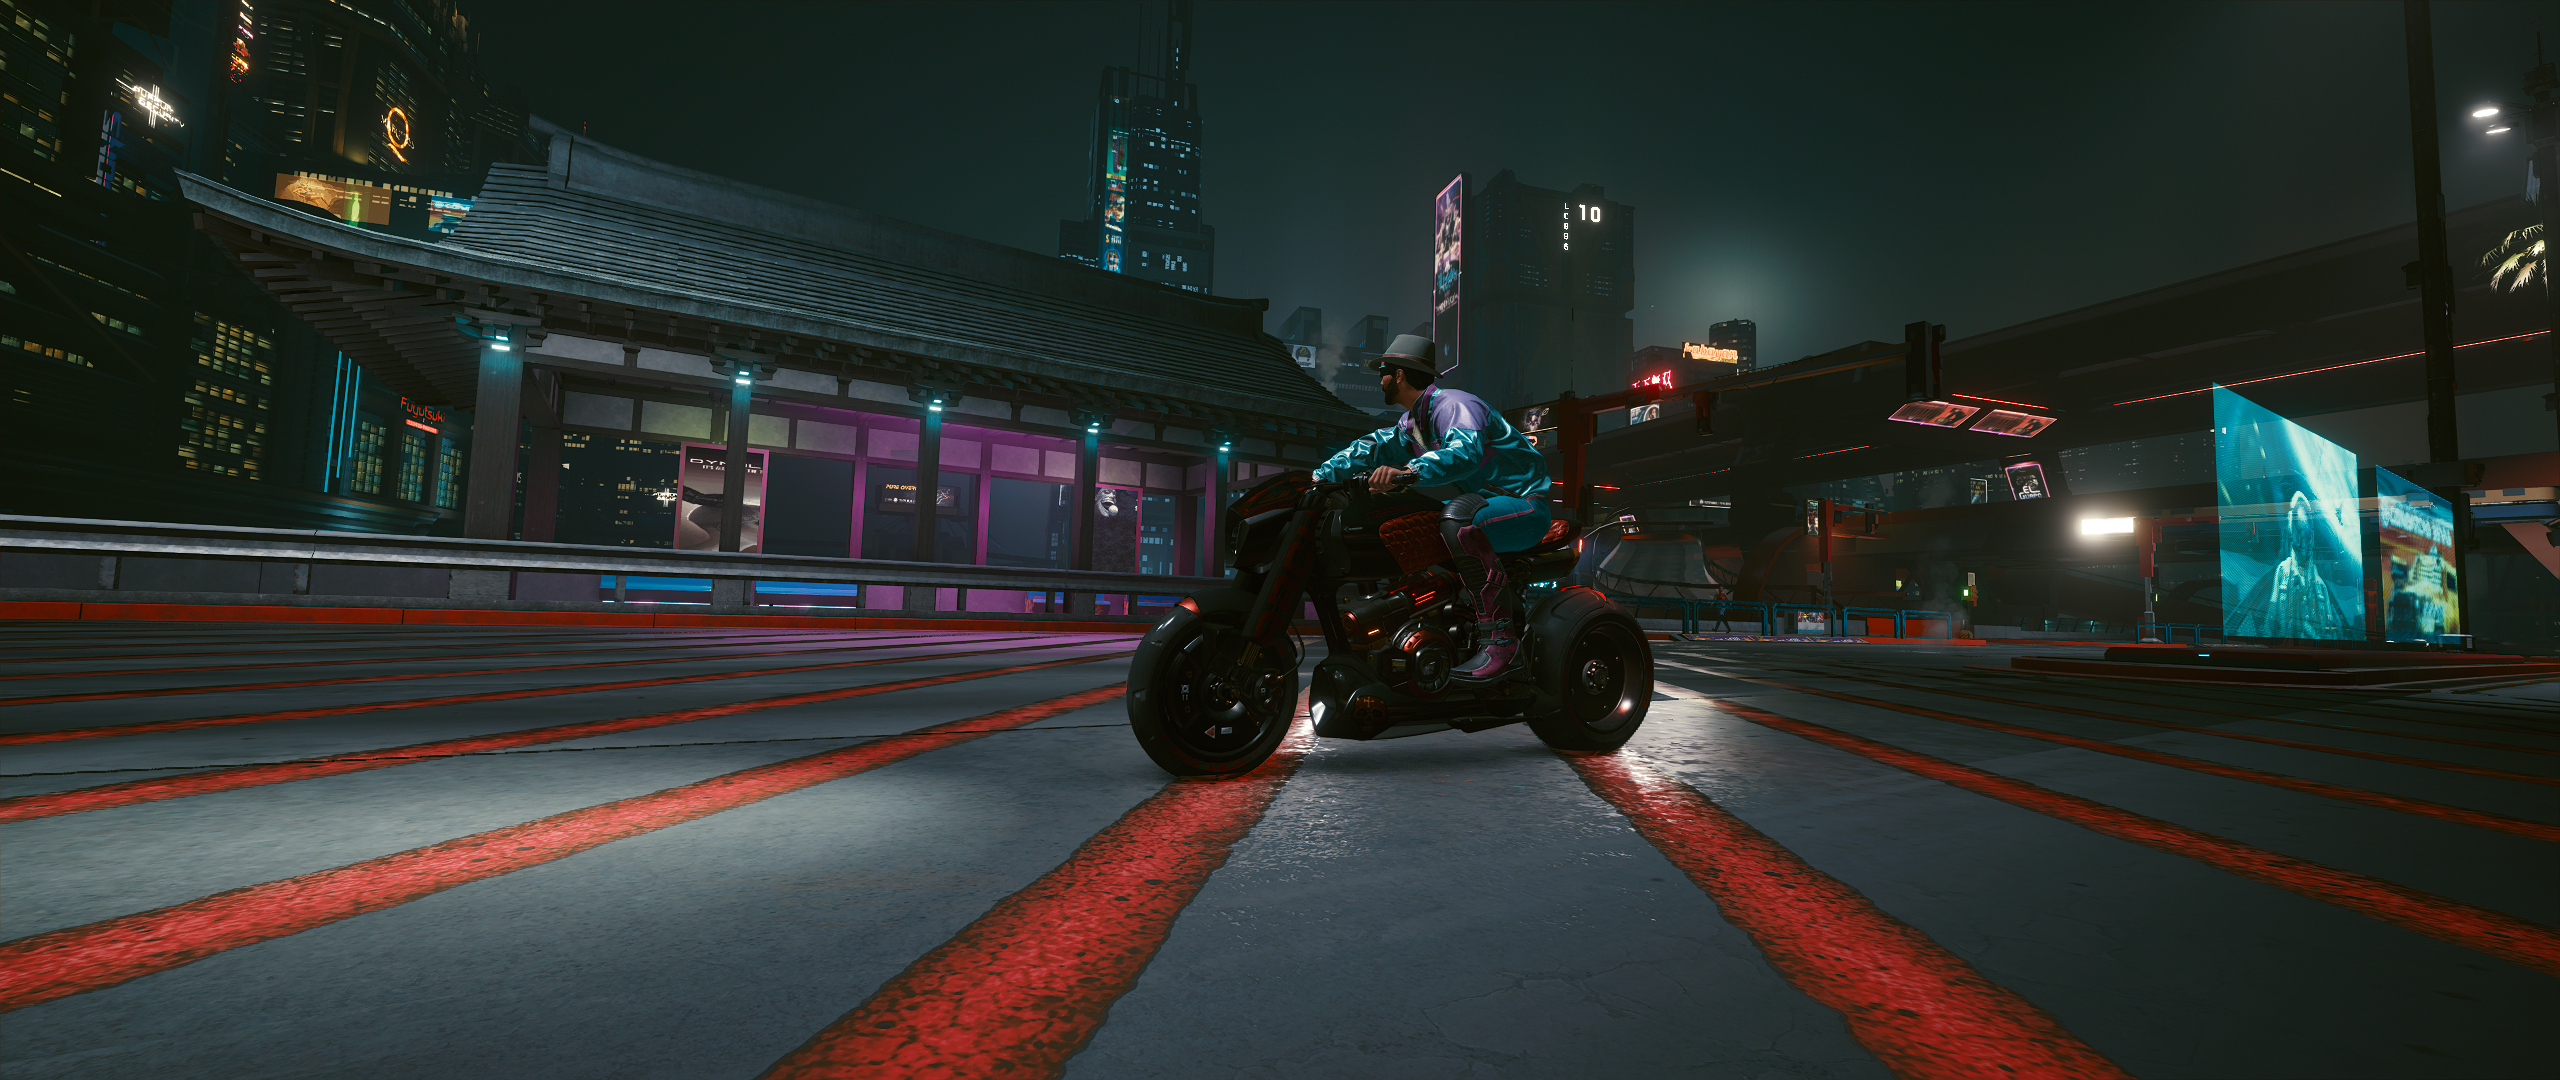 Cyberpunk 2077 City Motorcycle ARCH Motorcycle 2560x1080